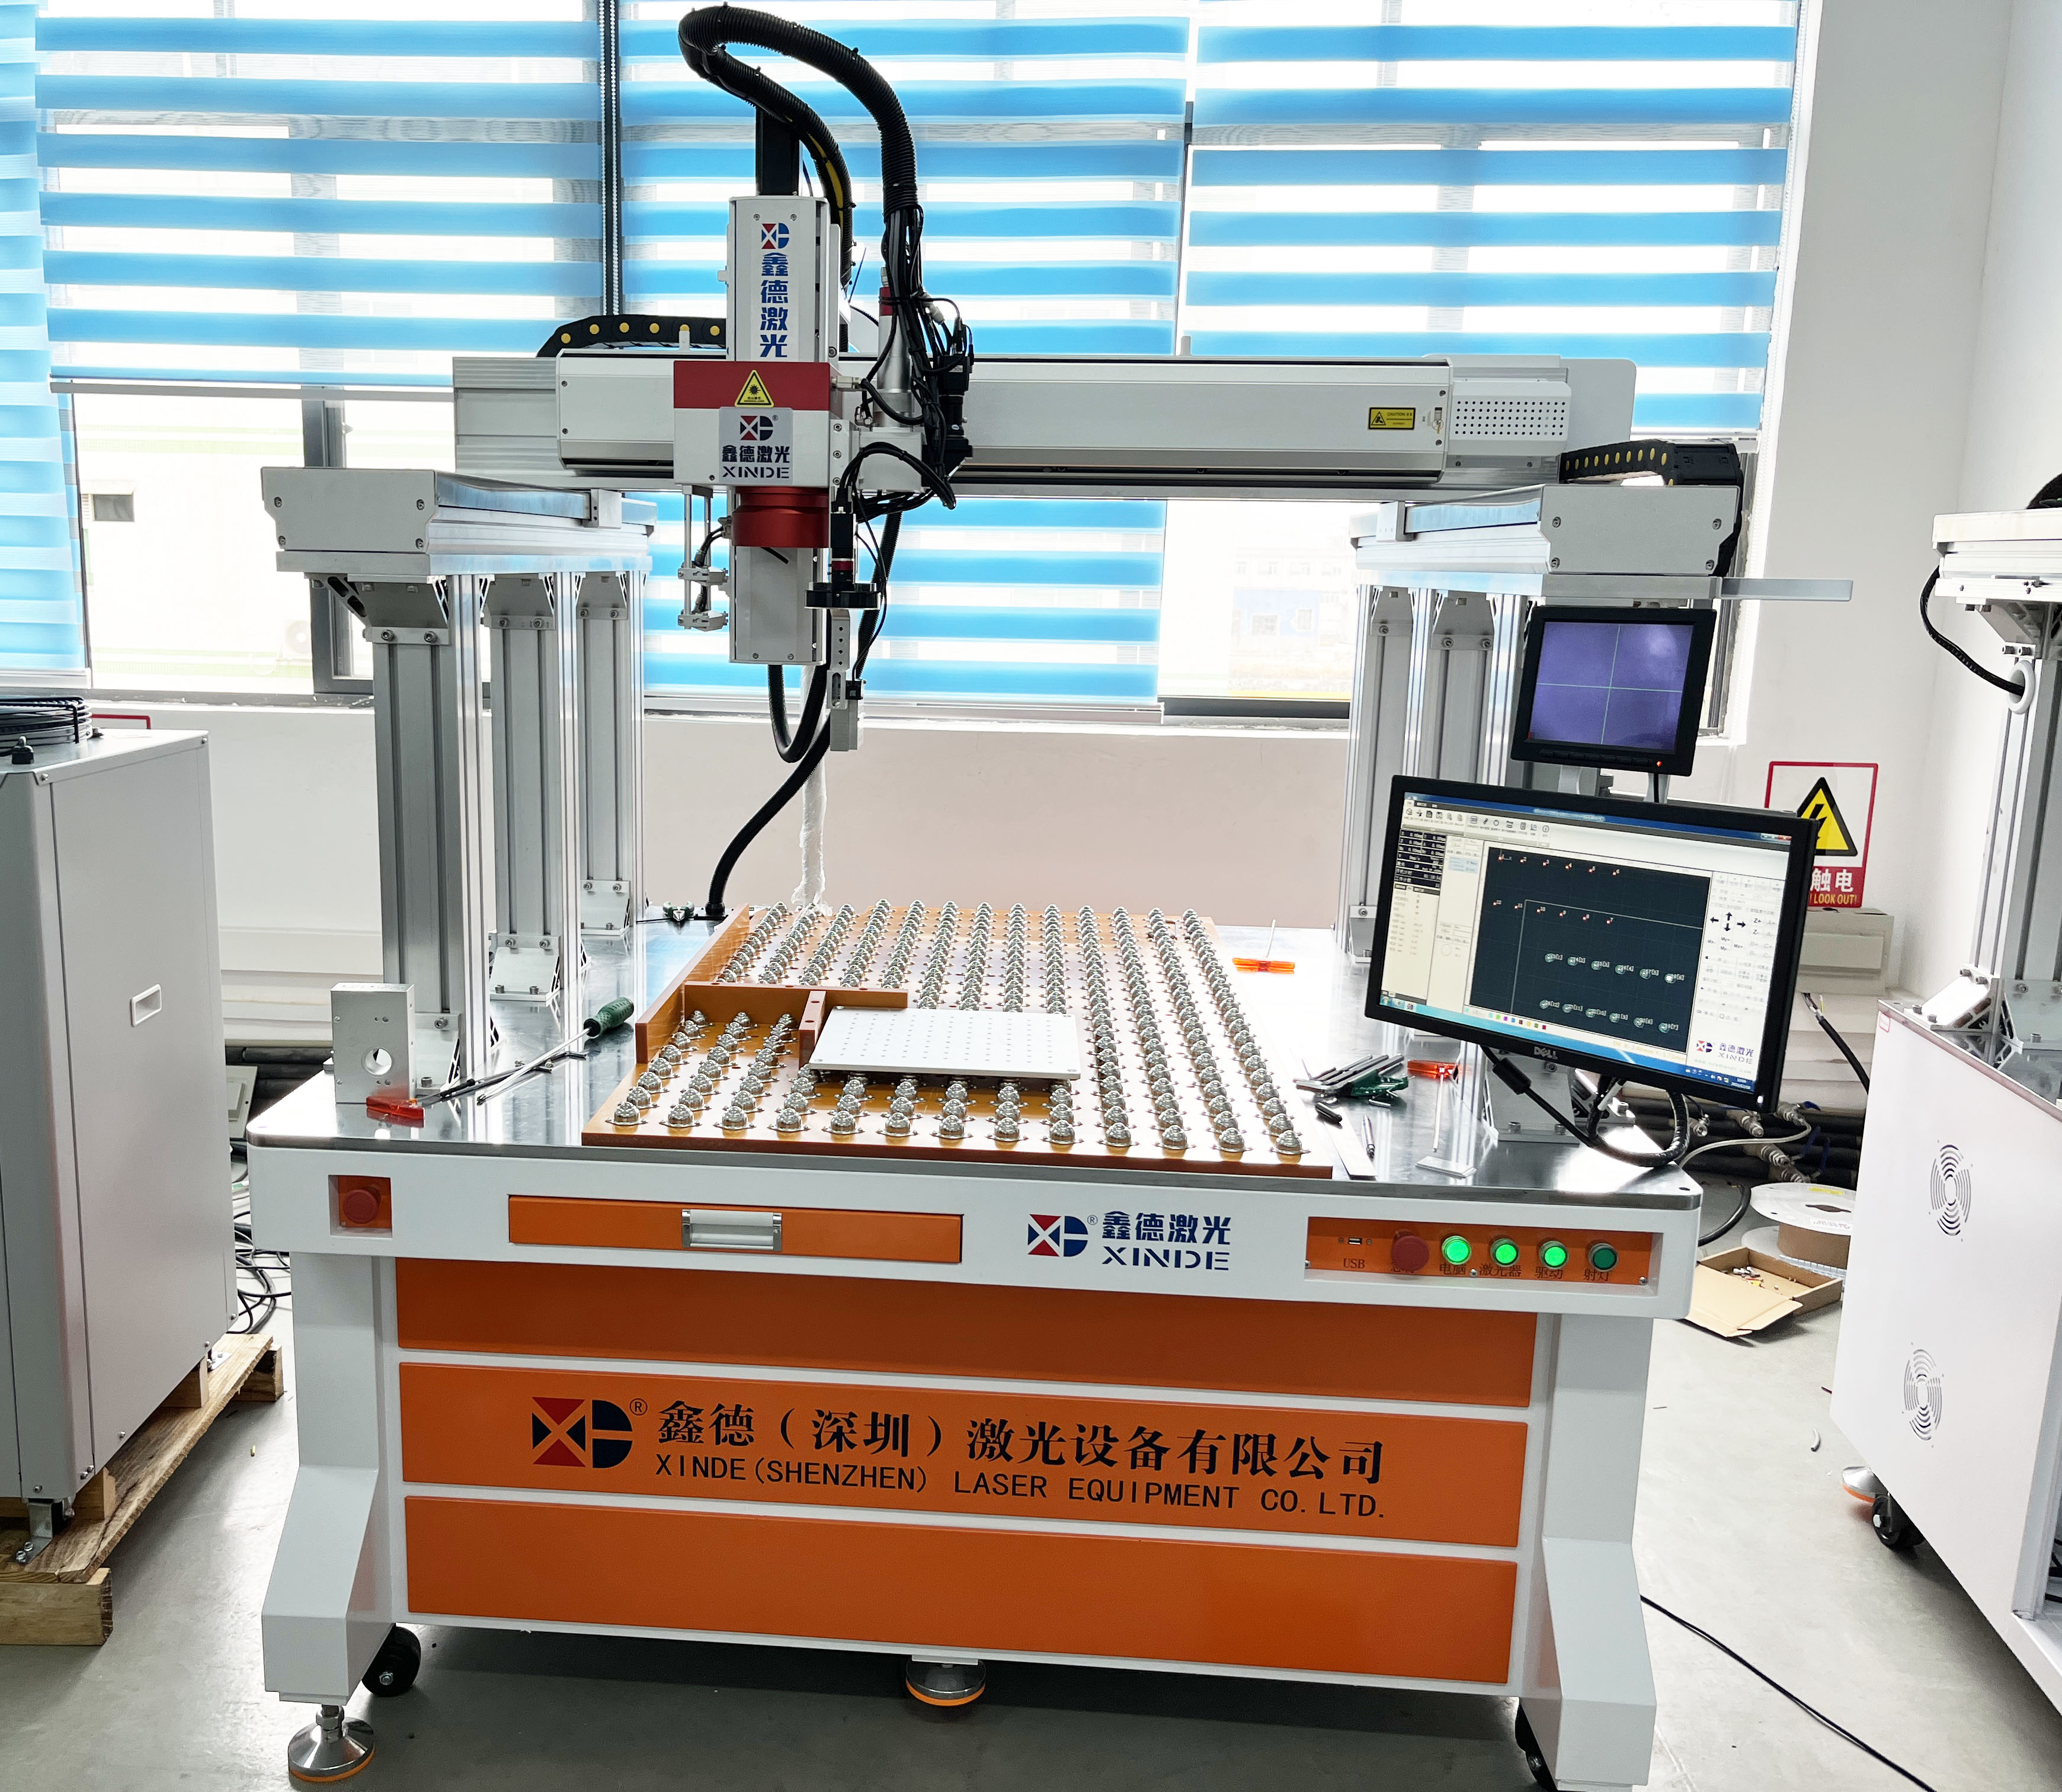 Advantages and application range of automatic visual positioning laser welding machine